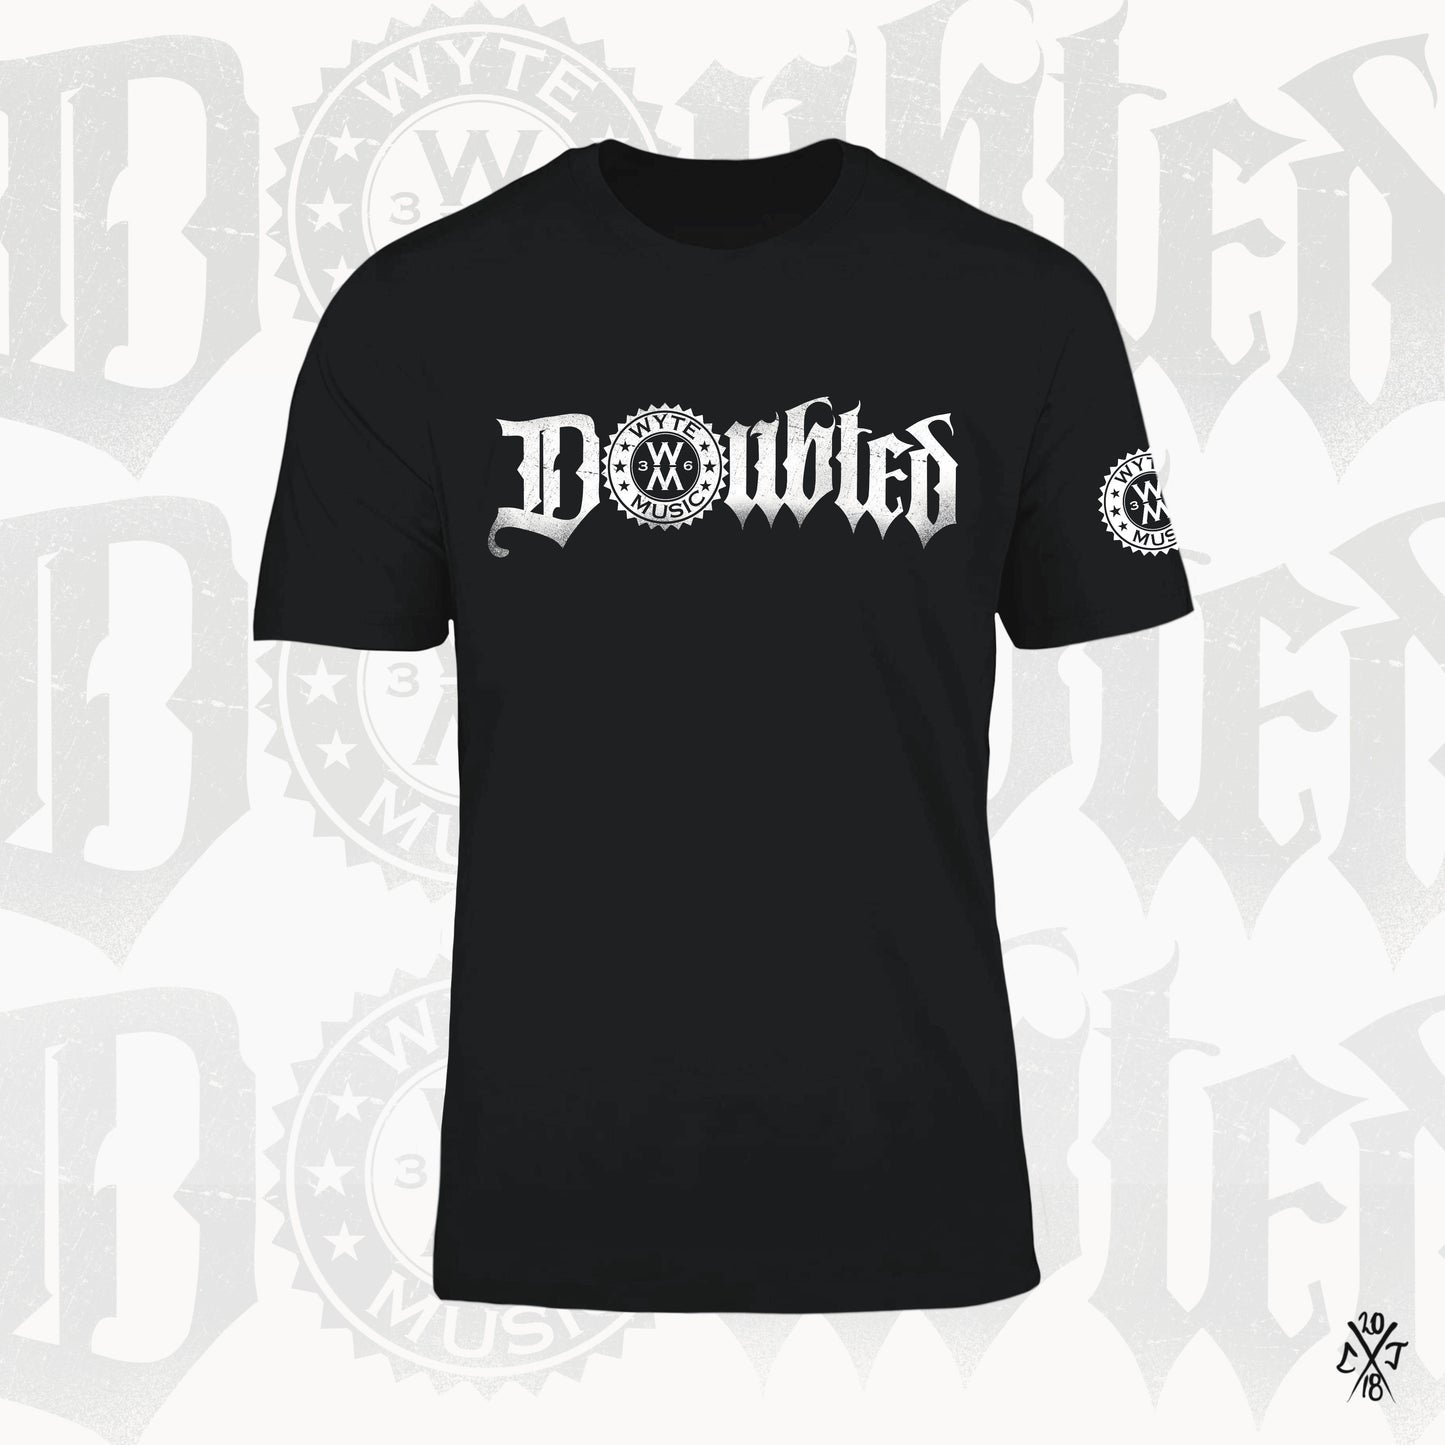 Doubted T-Shirt (Black) – The Wyte House